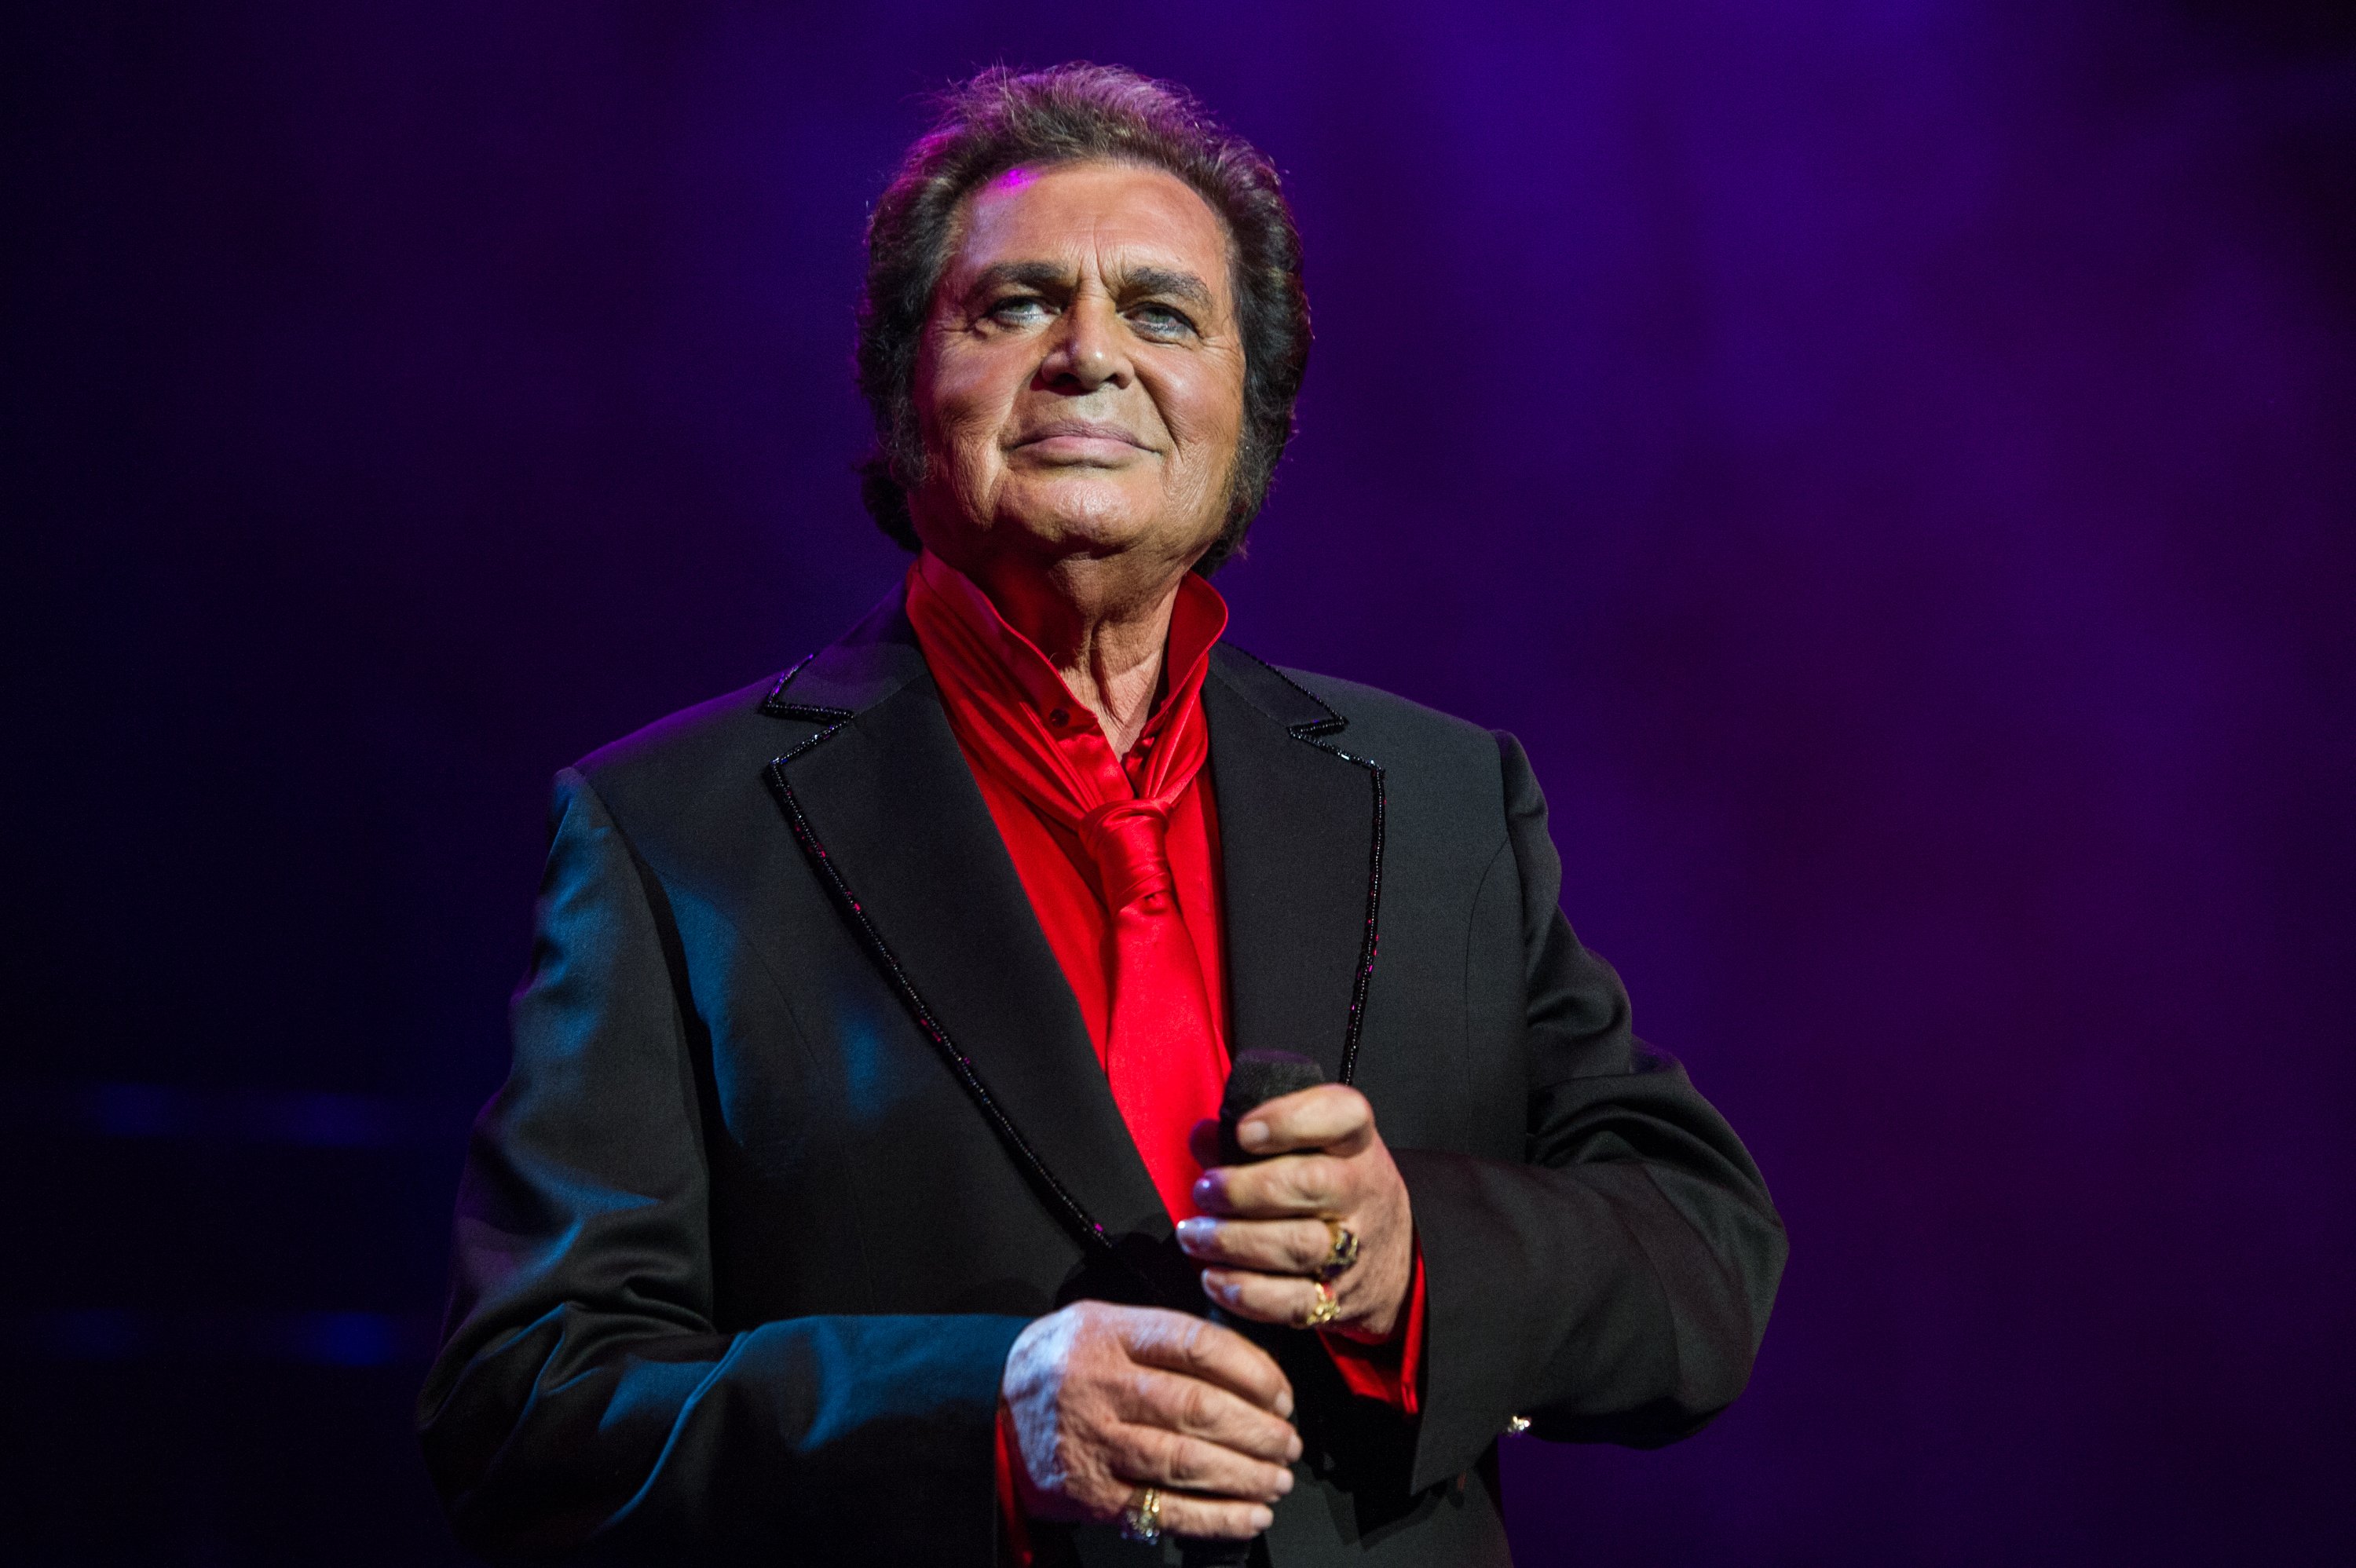 Engelbert Humperdinck performs at the Royal Albert Hall in London, England on May 29, 2015 | Photo: Getty Images